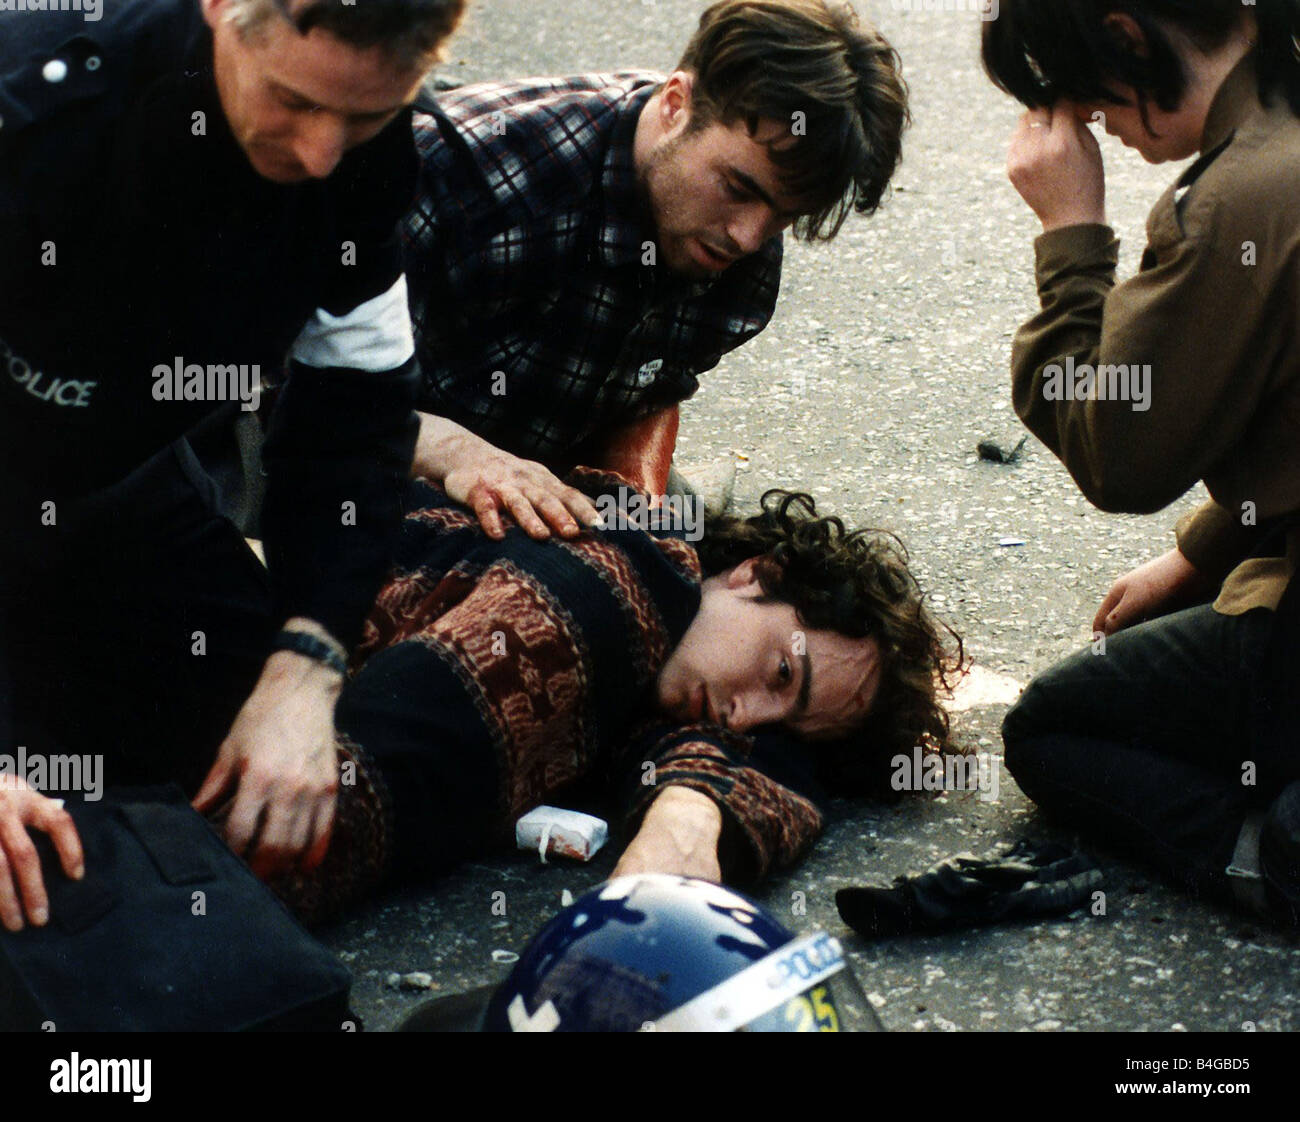 Demonstration Poll Tax March 1990 A man lies bleeding on the ground being attended by a police officer after the riots at Trafalgar Square in London Stock Photo